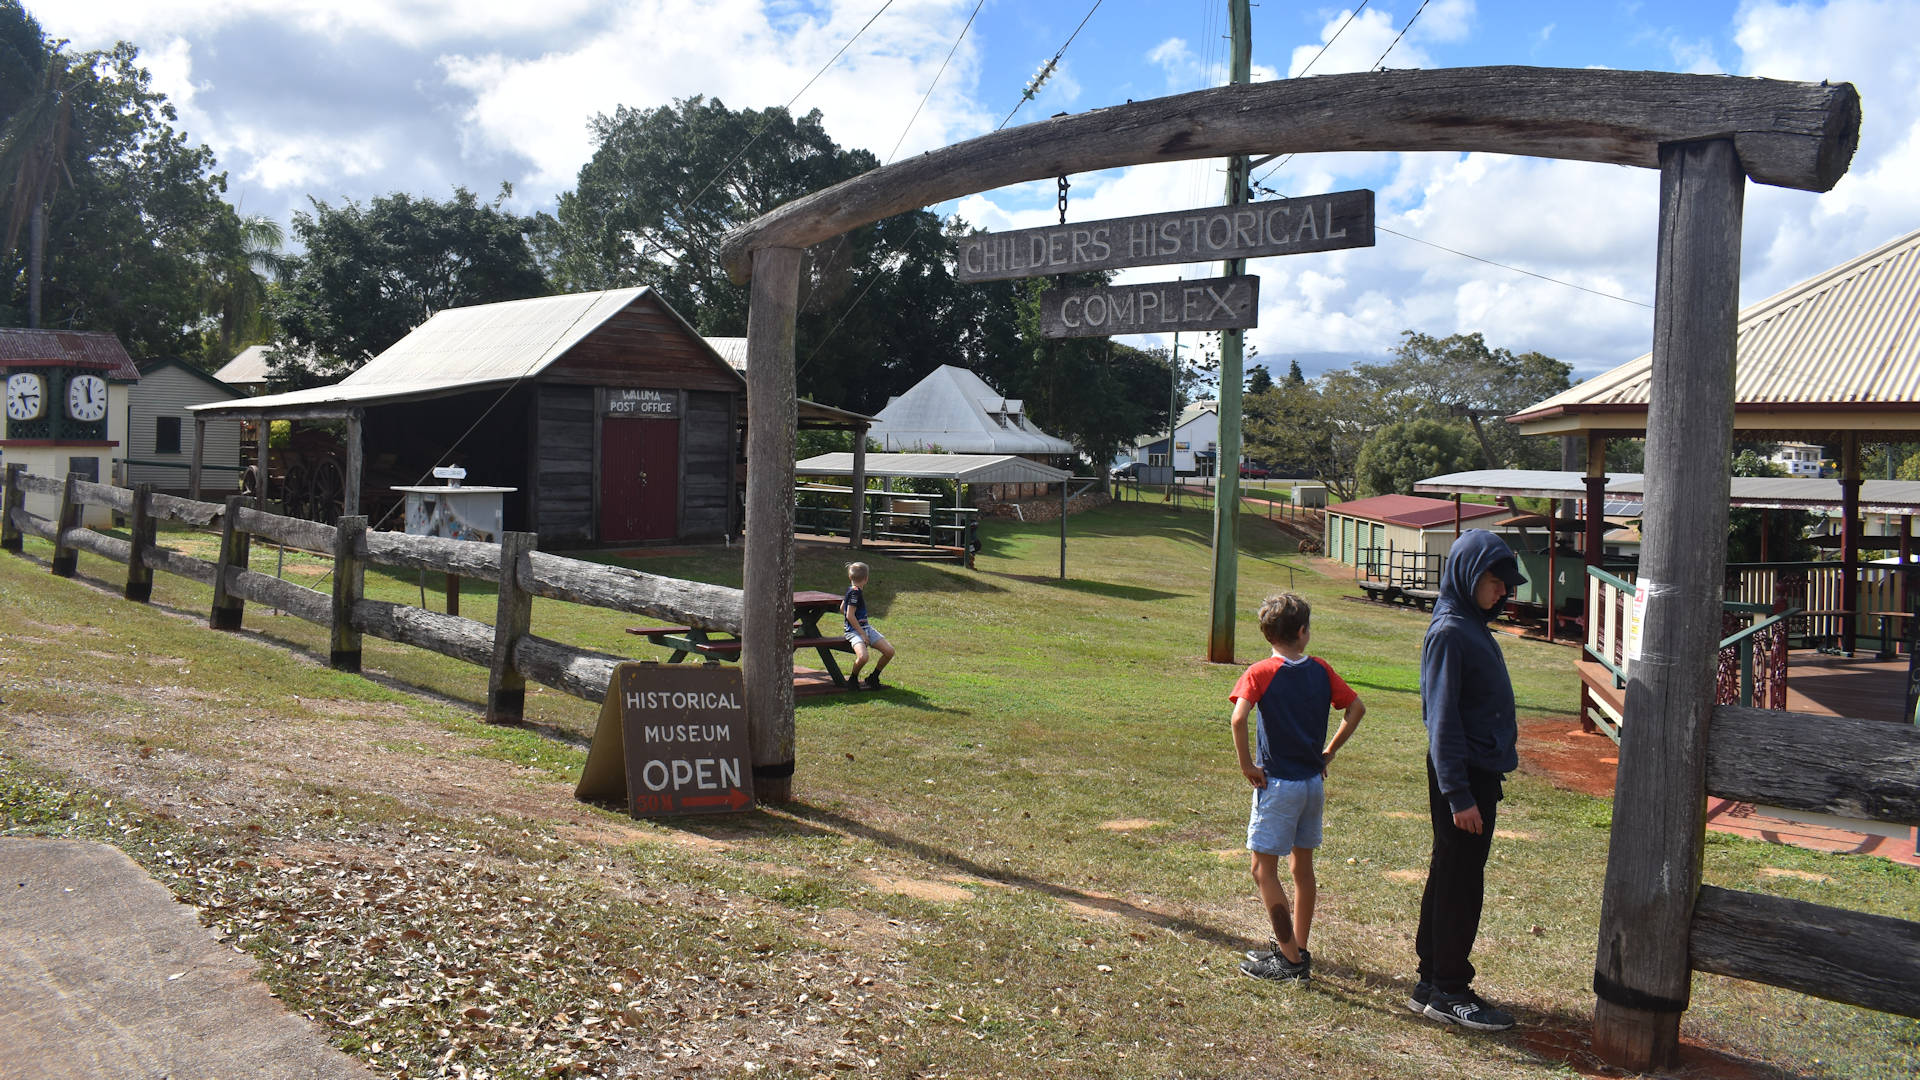 Entrance to the Historical Complex in Childers, Queensland